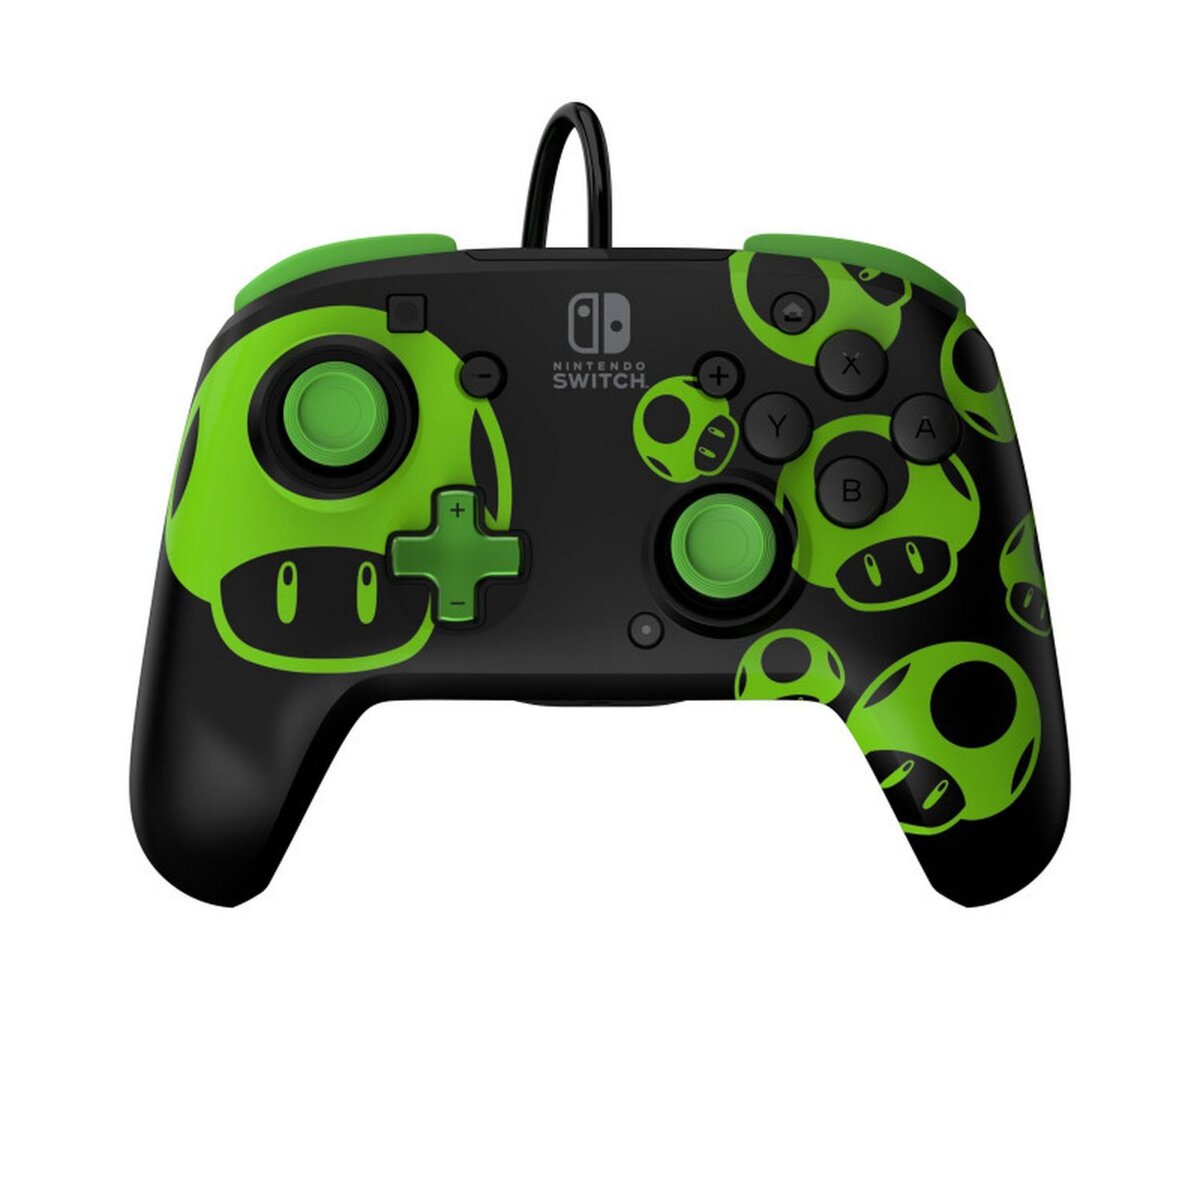 Manette Filaire 1up Glow in The Dark Nintendo Switch